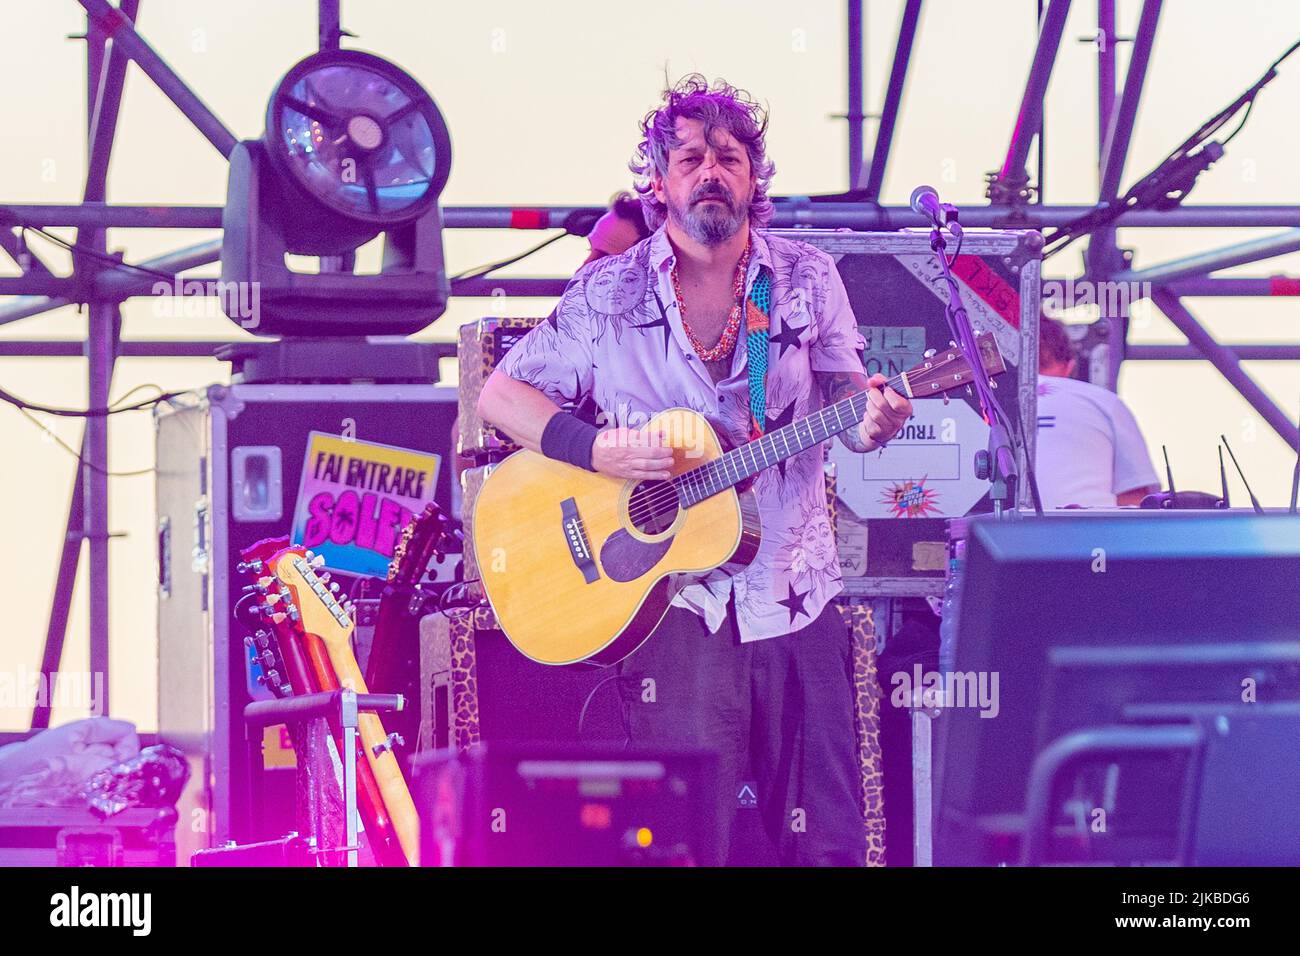 Barletta, Italy. 31st July, 2022. Riccardo Onori during JOVA BEACH PARTY, Italian singer Music Concert in Barletta, Italy, July 31 2022 Credit: Independent Photo Agency/Alamy Live News Stock Photo